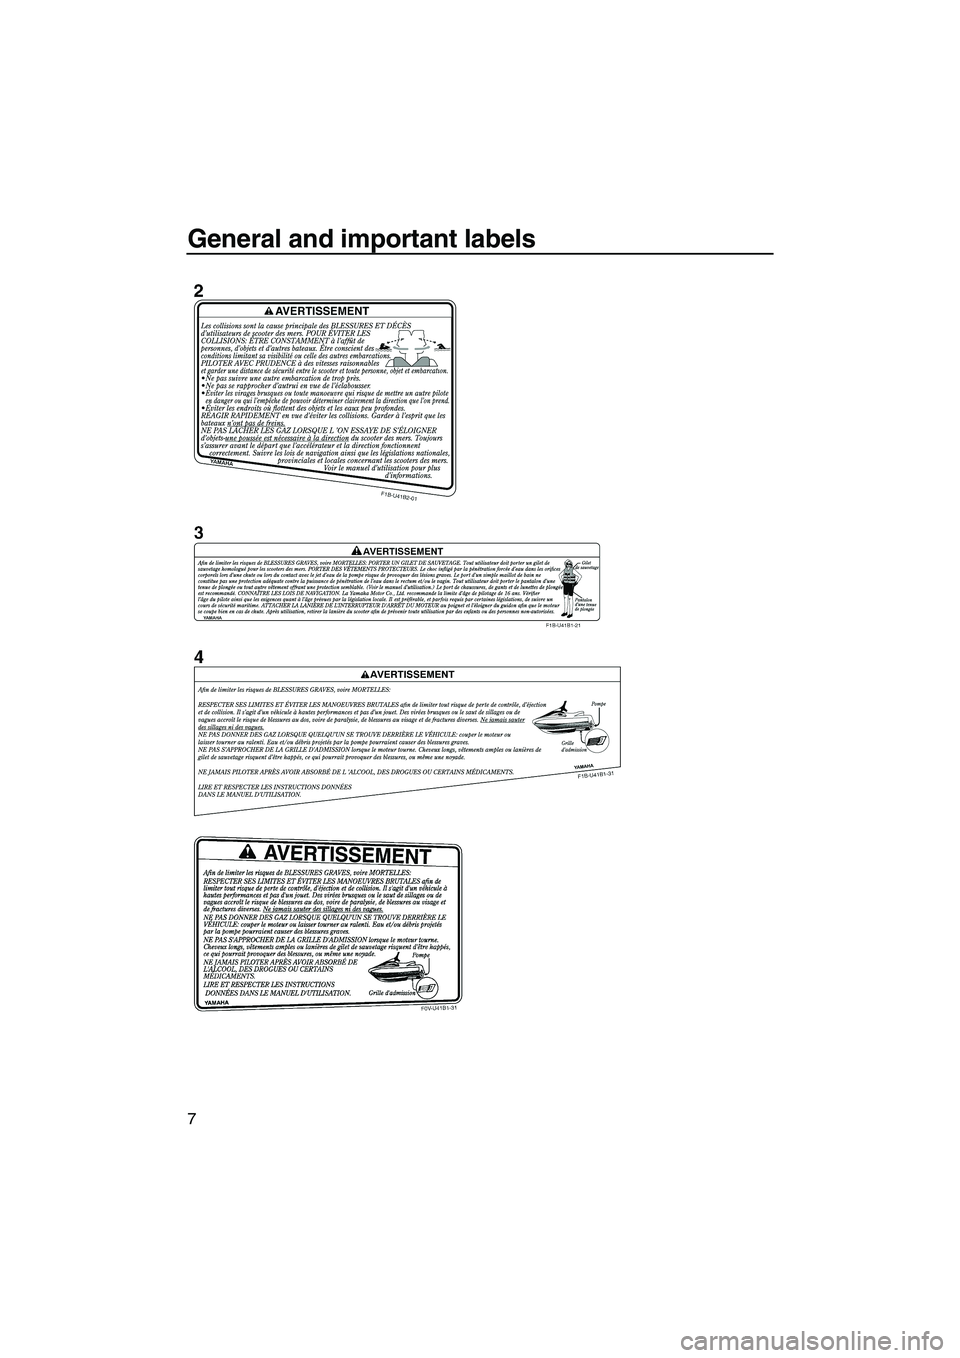 YAMAHA VX SPORT 2007 User Guide General and important labels
7
UF1K72E0.book  Page 7  Wednesday, August 2, 2006  10:43 AM 